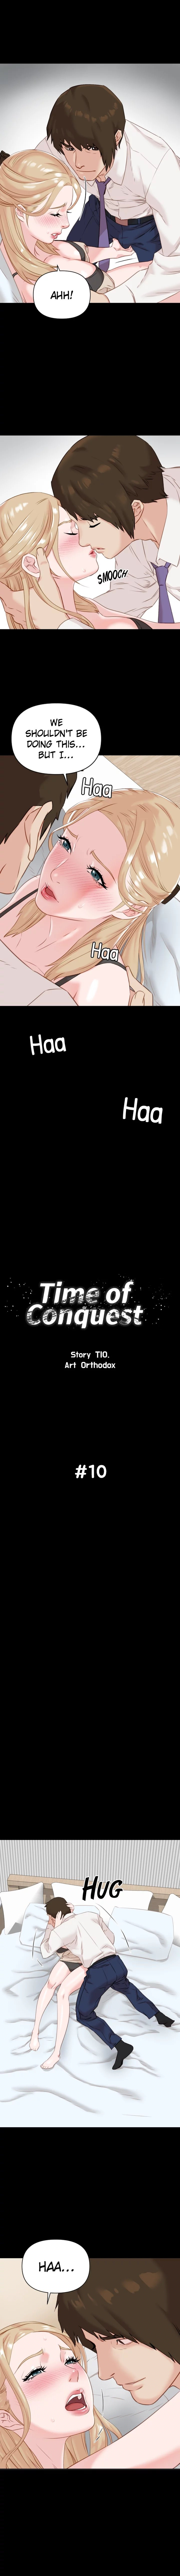 time-of-conquest-chap-10-3